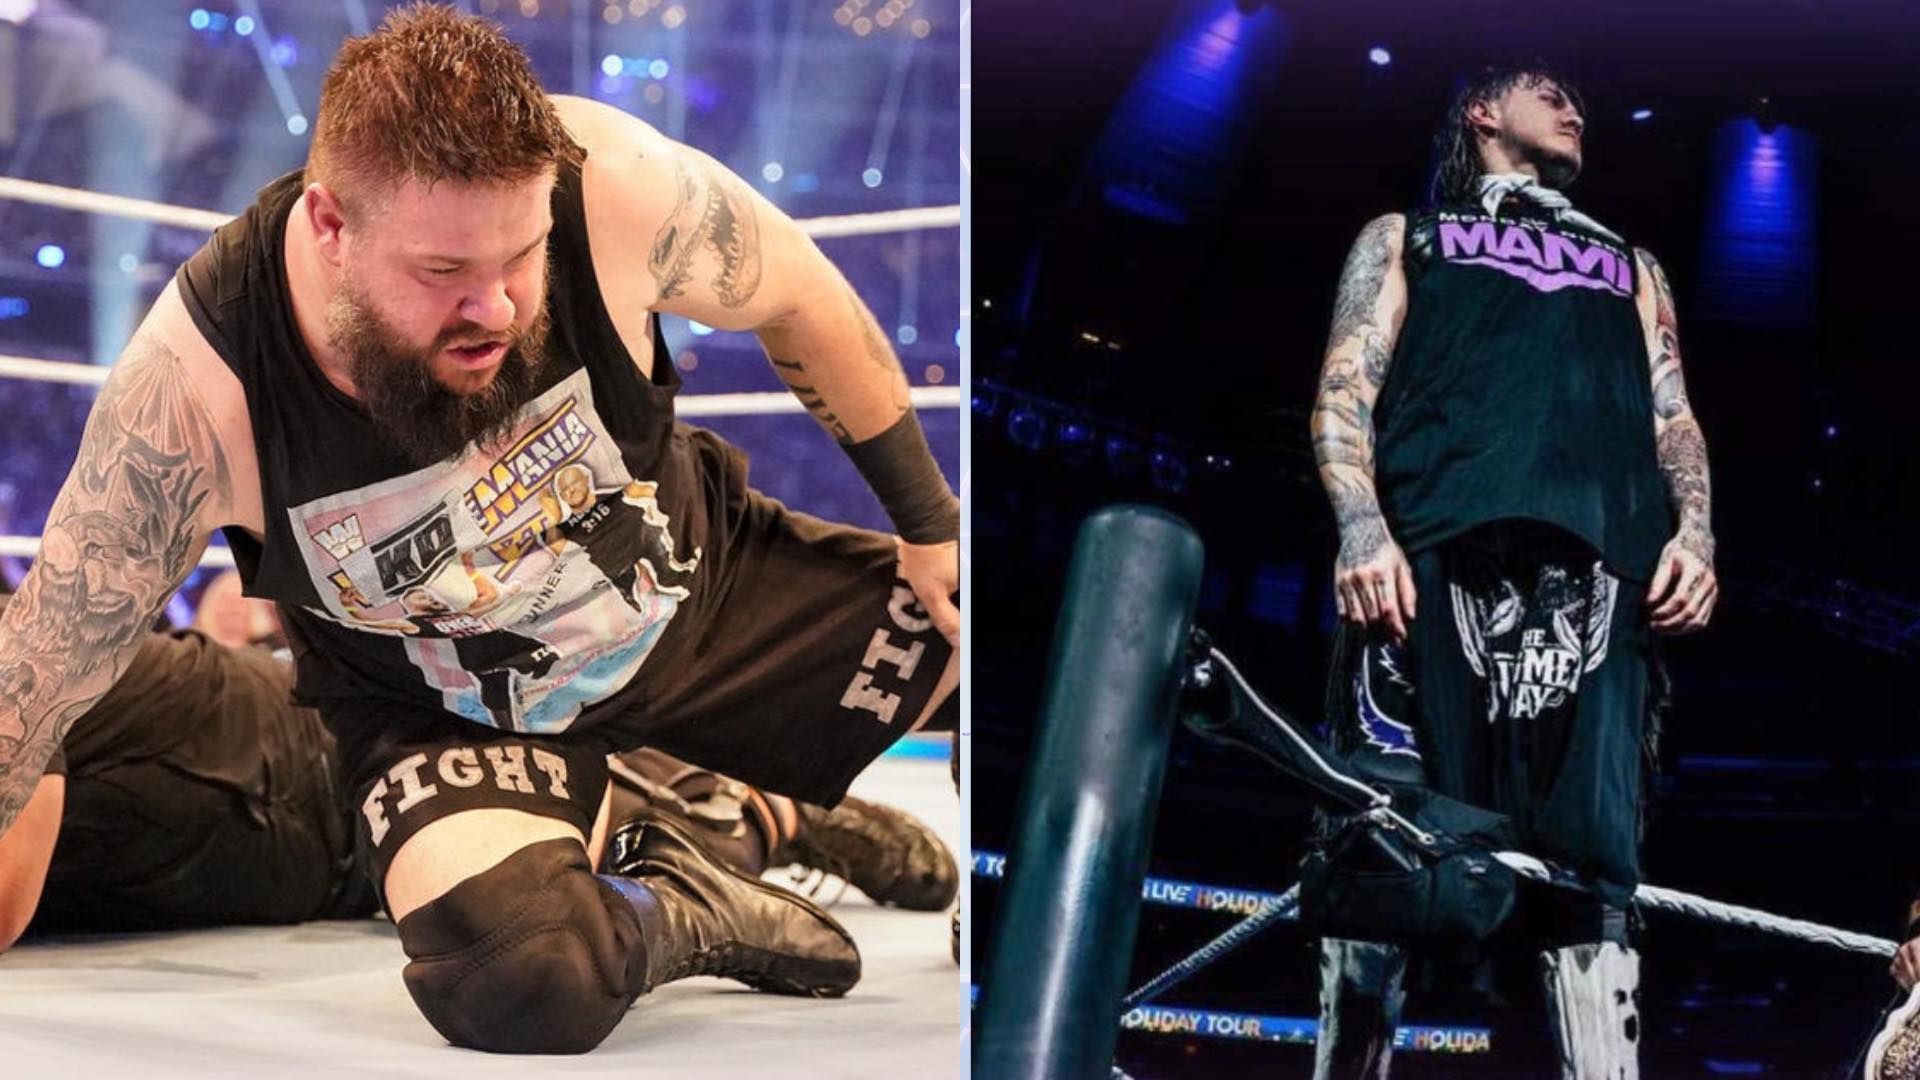 Kevin Owens will face Dominik Mysterio in the Elimination Chamber qualifying match on SmackDown 